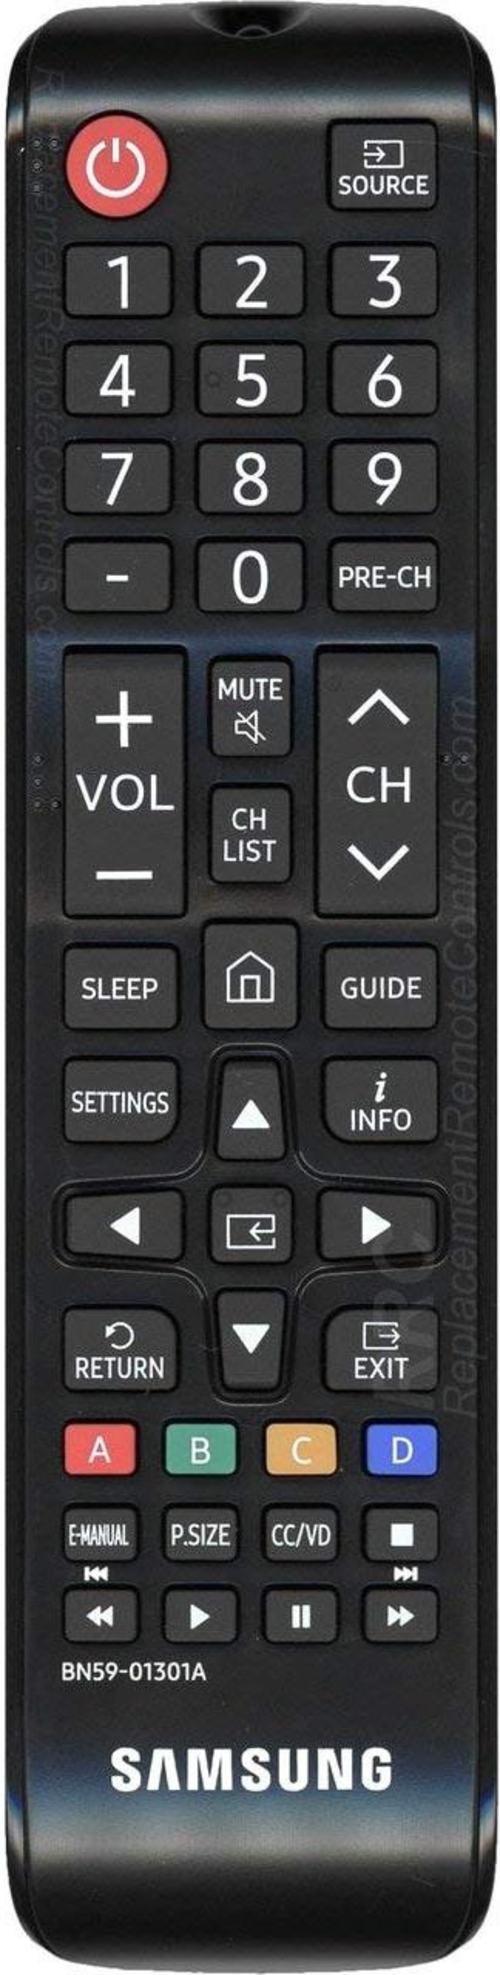 Samsung BN59-01301A Remote Control for Smart LED TV - 2 x AAA Battery Required